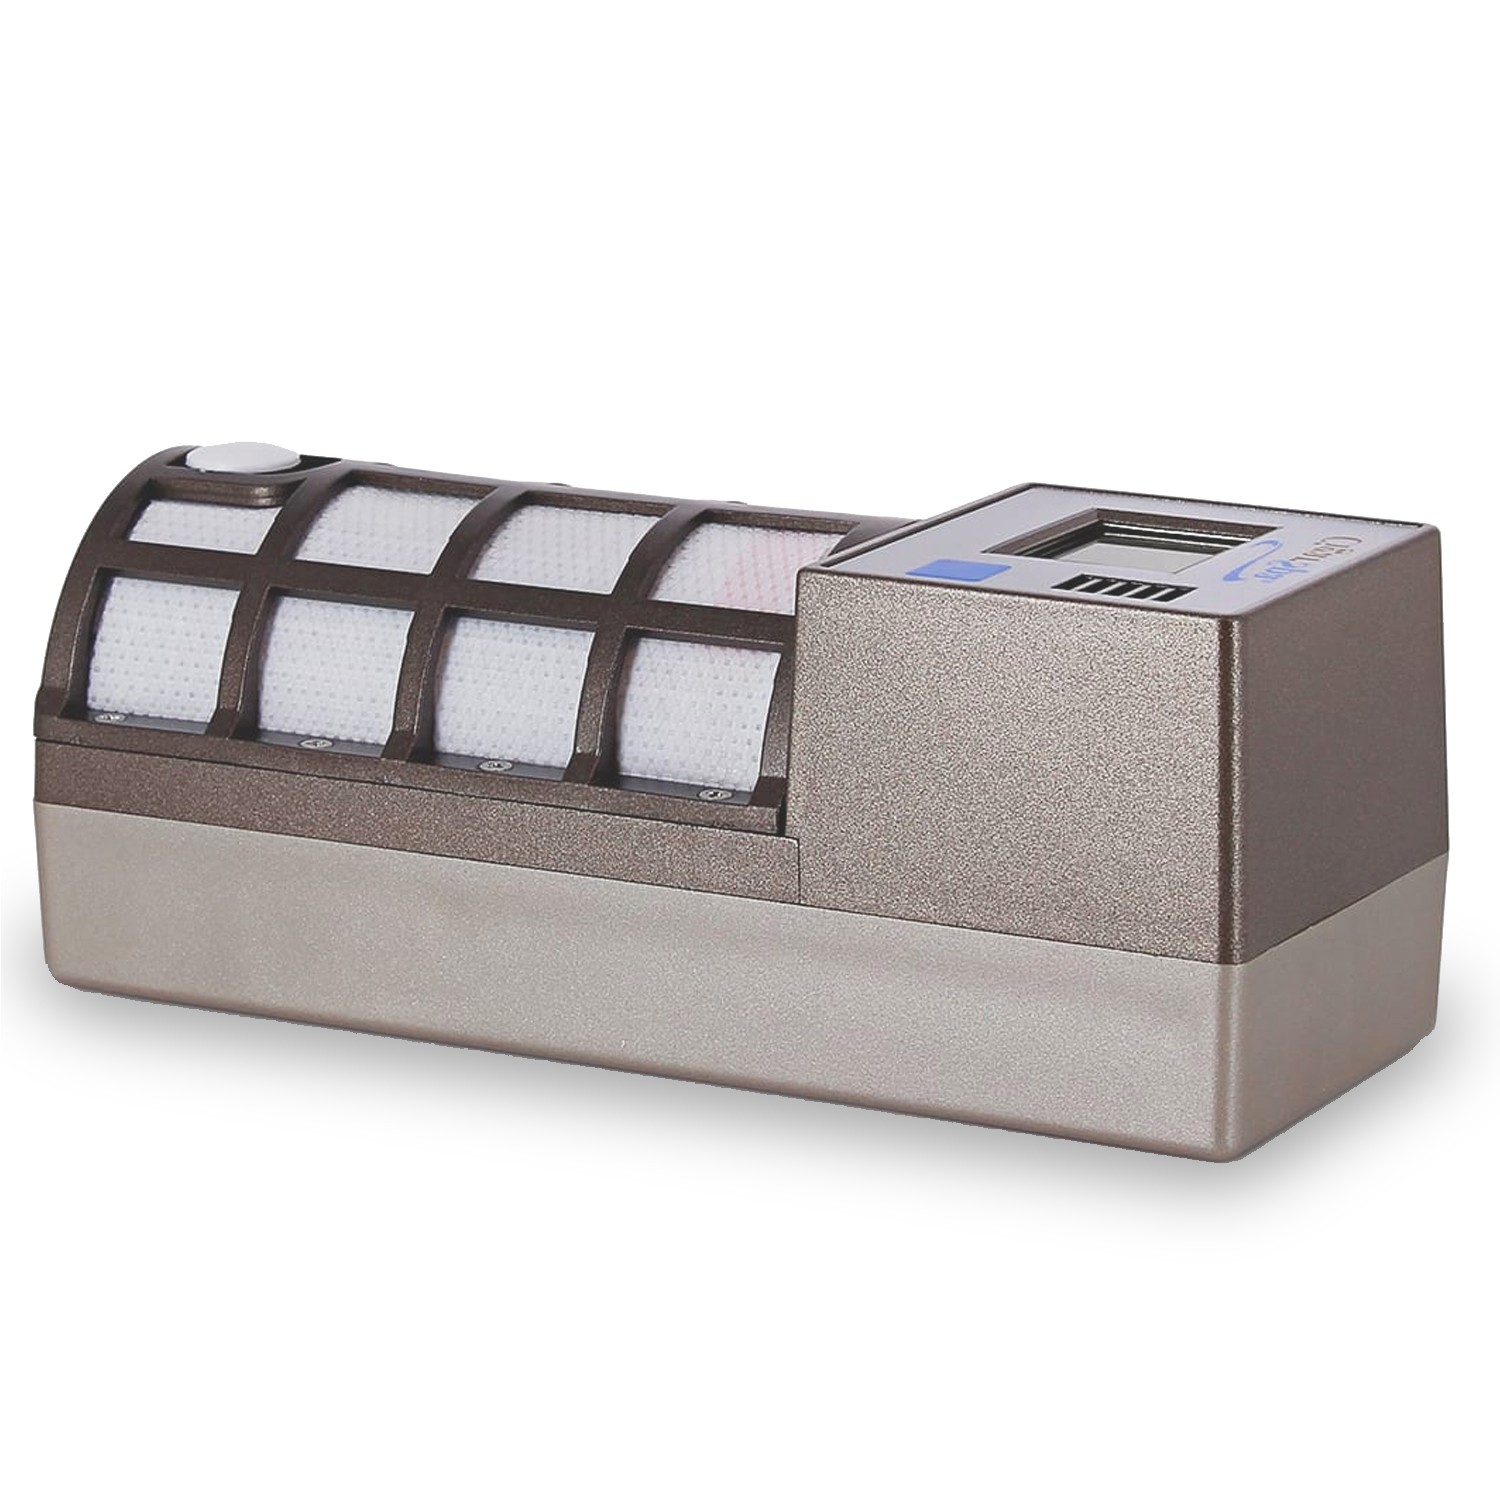 Humidificateur Cigare Rectangulaire